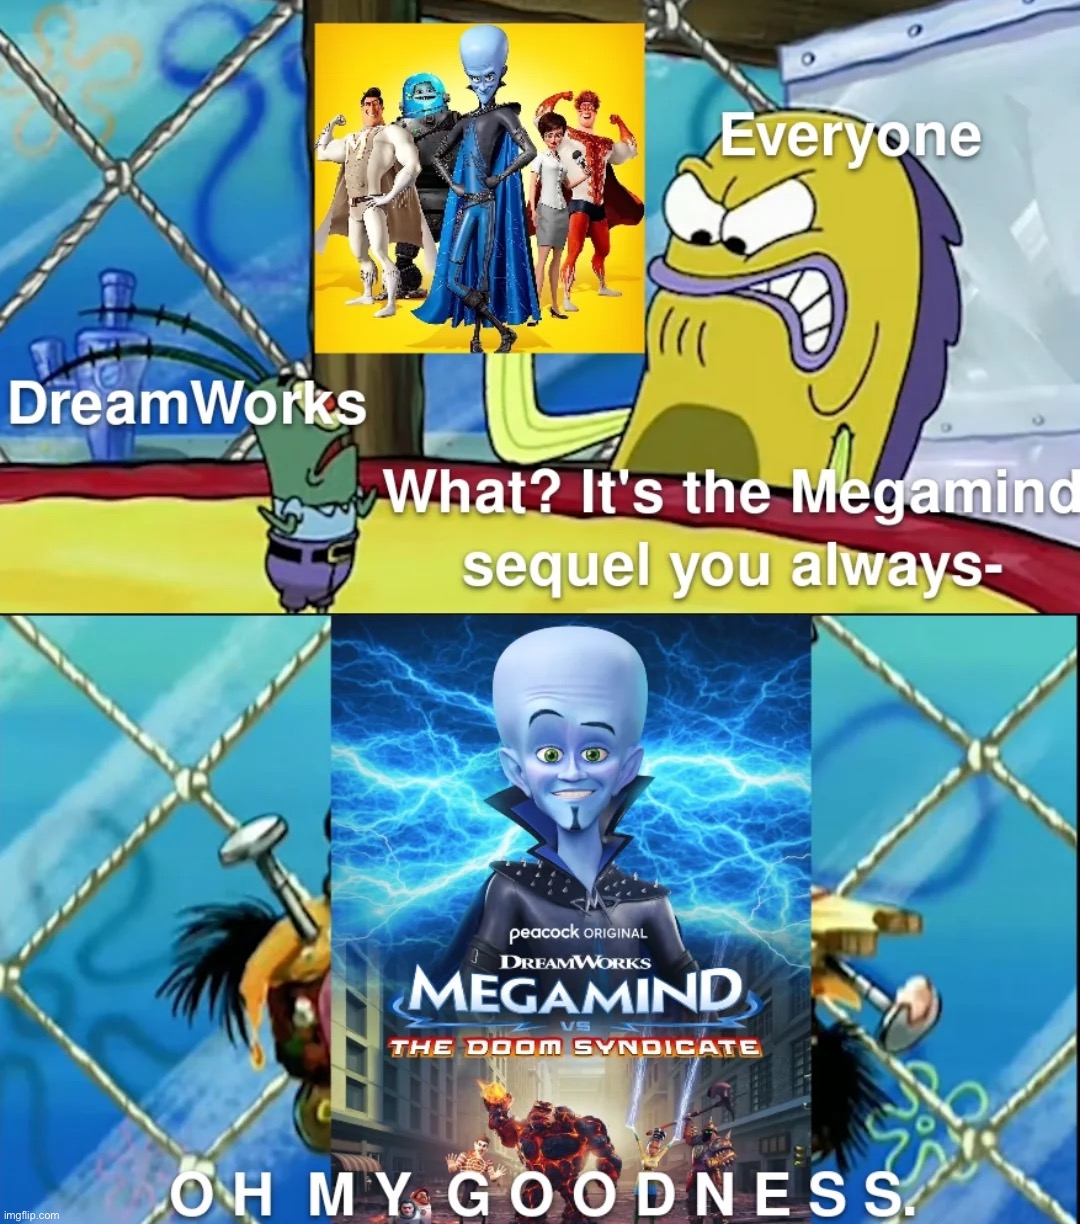 i'm so sorry that i had to post this... look how they massacred him with that goofy ahh CGI | image tagged in megamind,ruined,memes,repost,movies,cgi | made w/ Imgflip meme maker